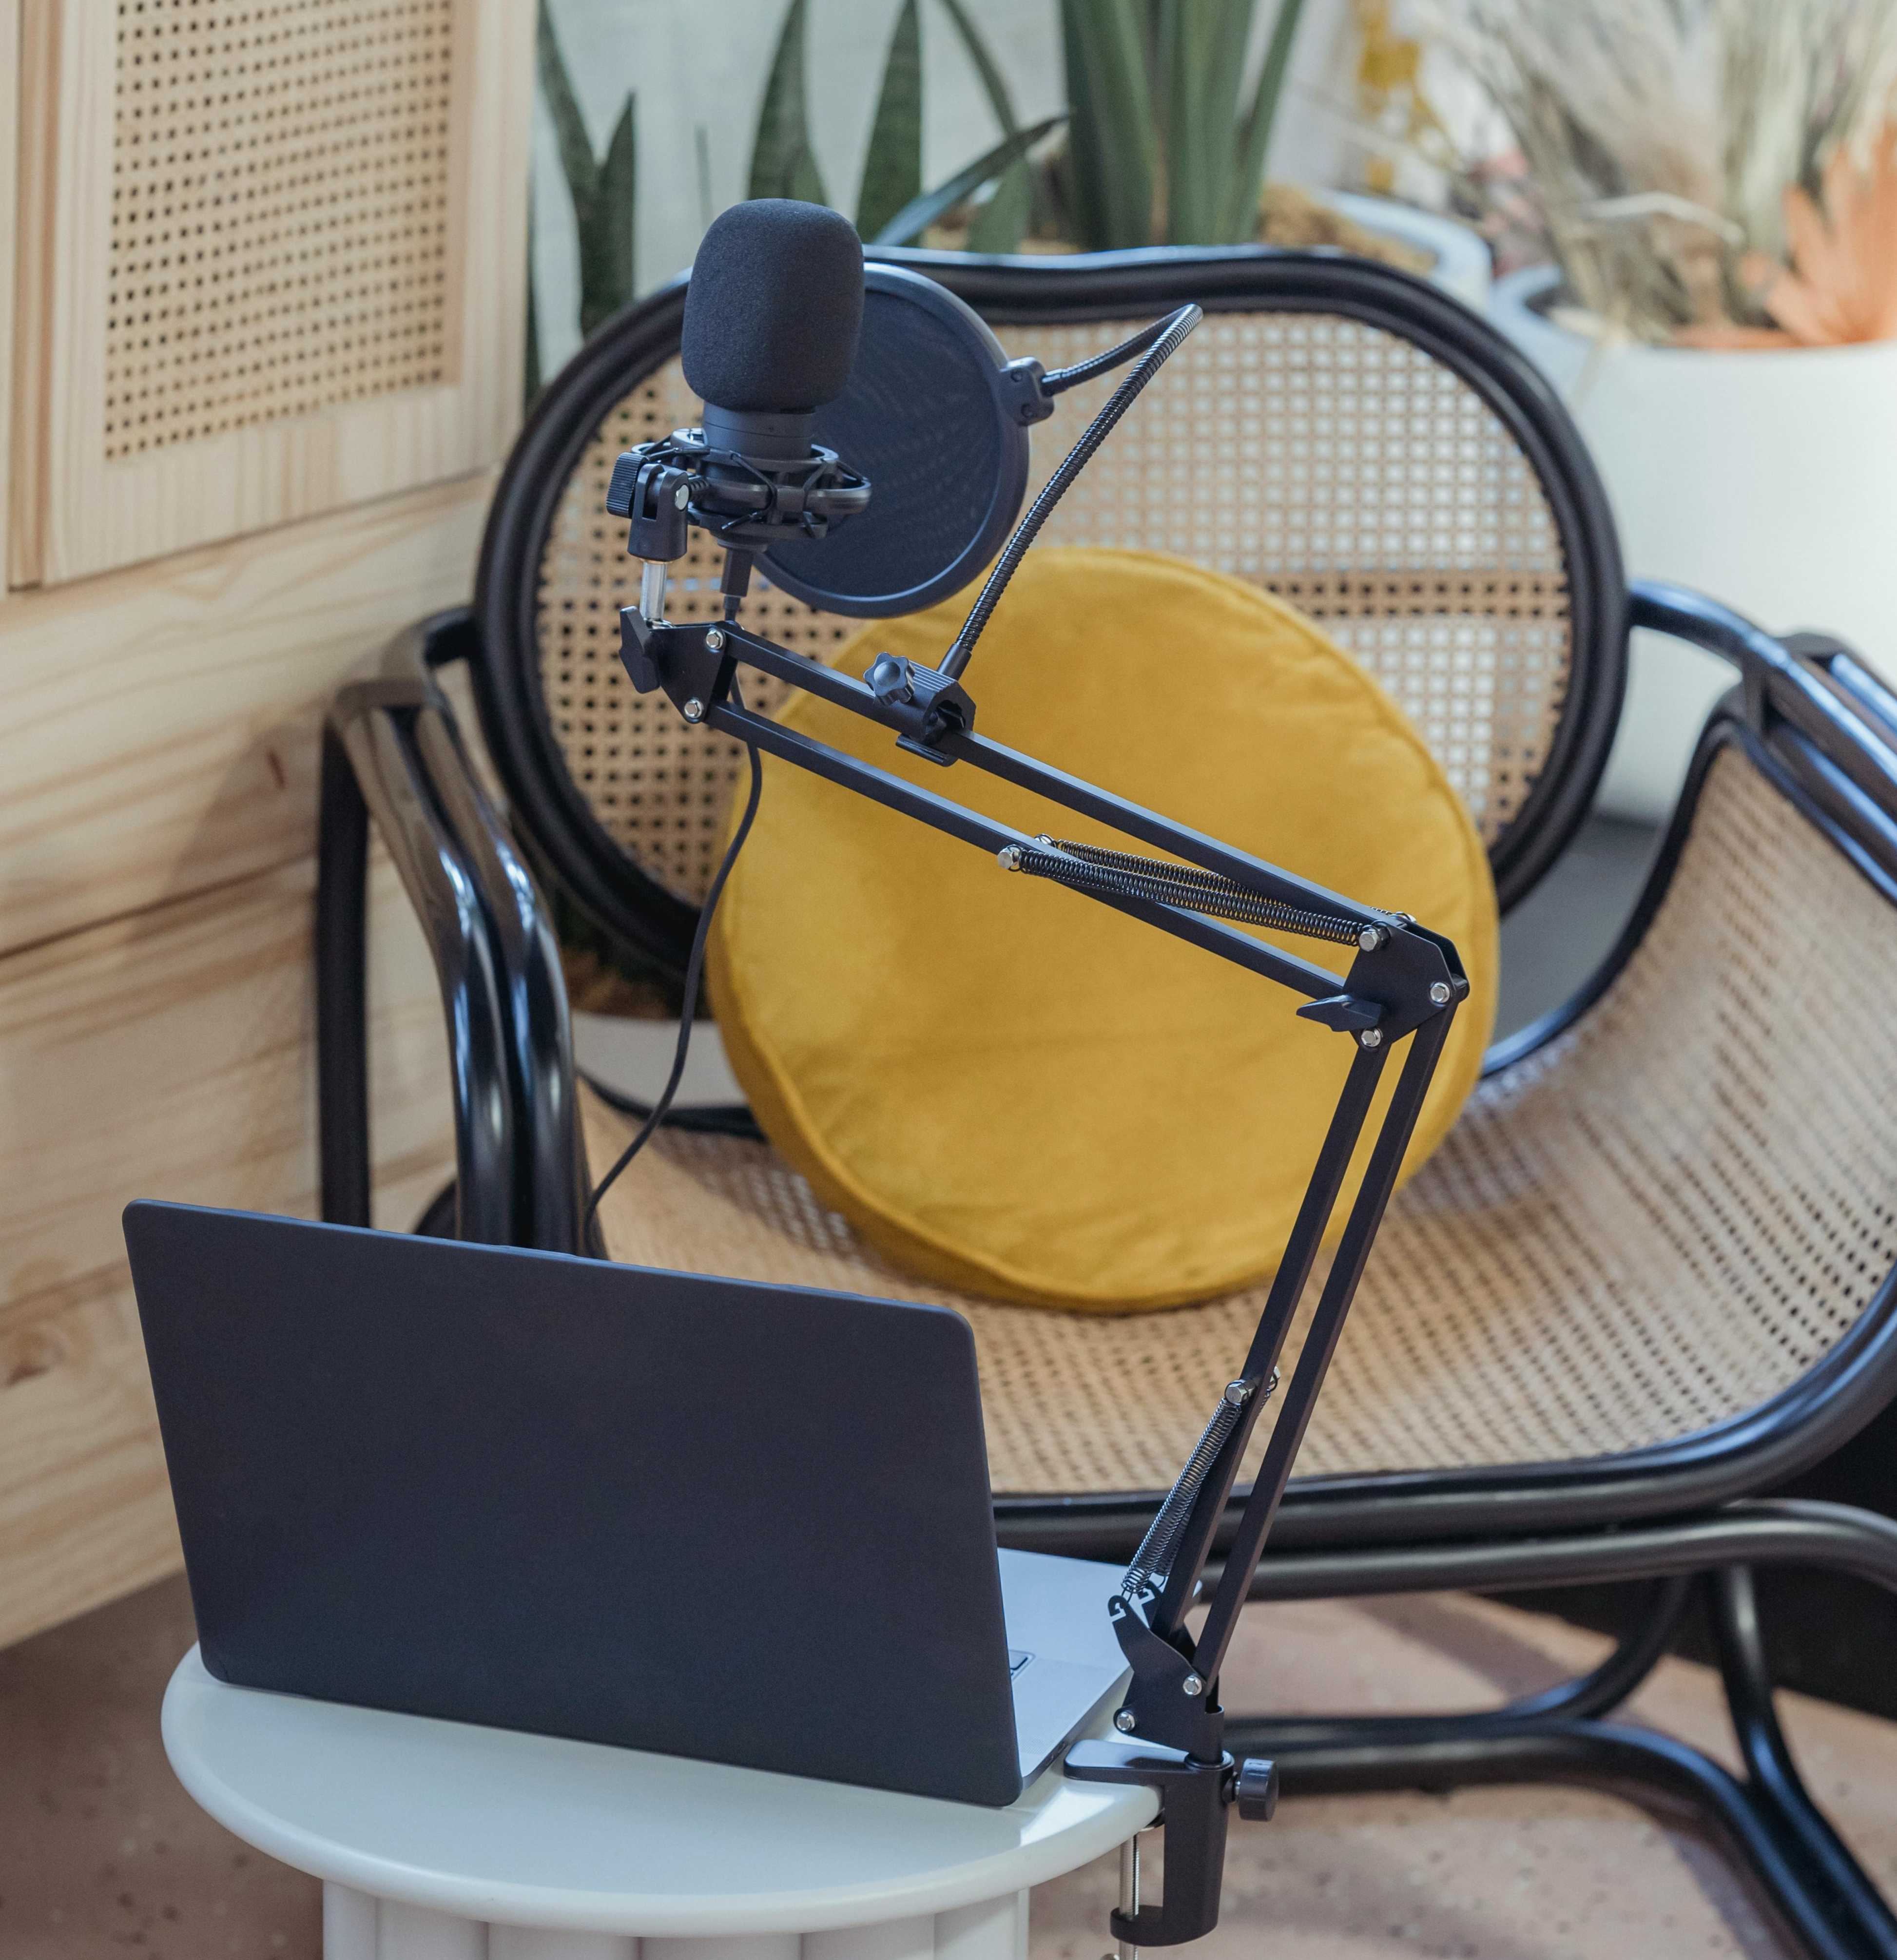 Laptop and microphone in front of a chair